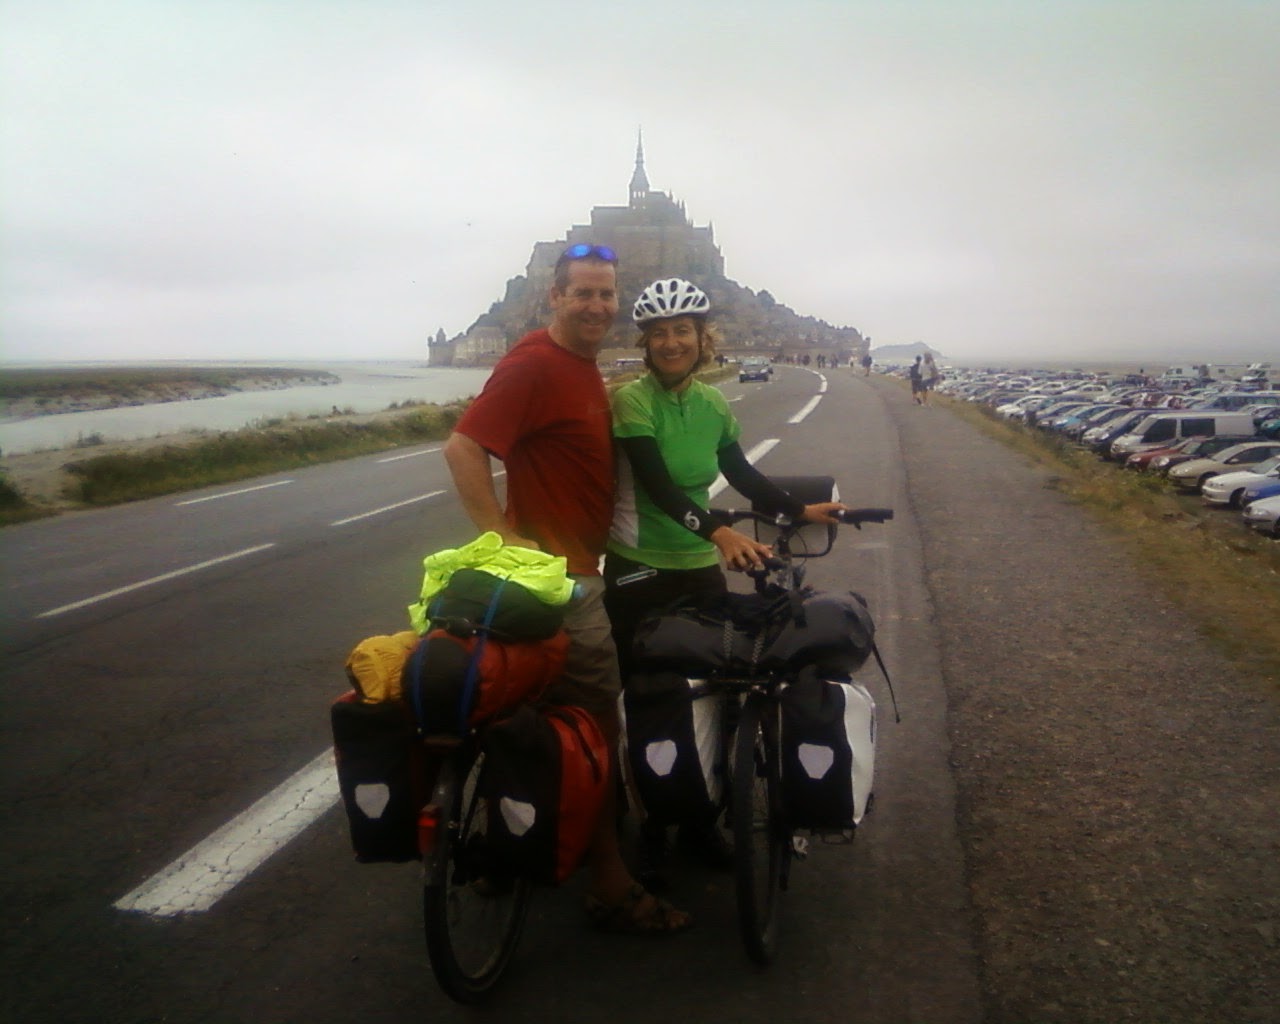 Man and woman with touring bicycles